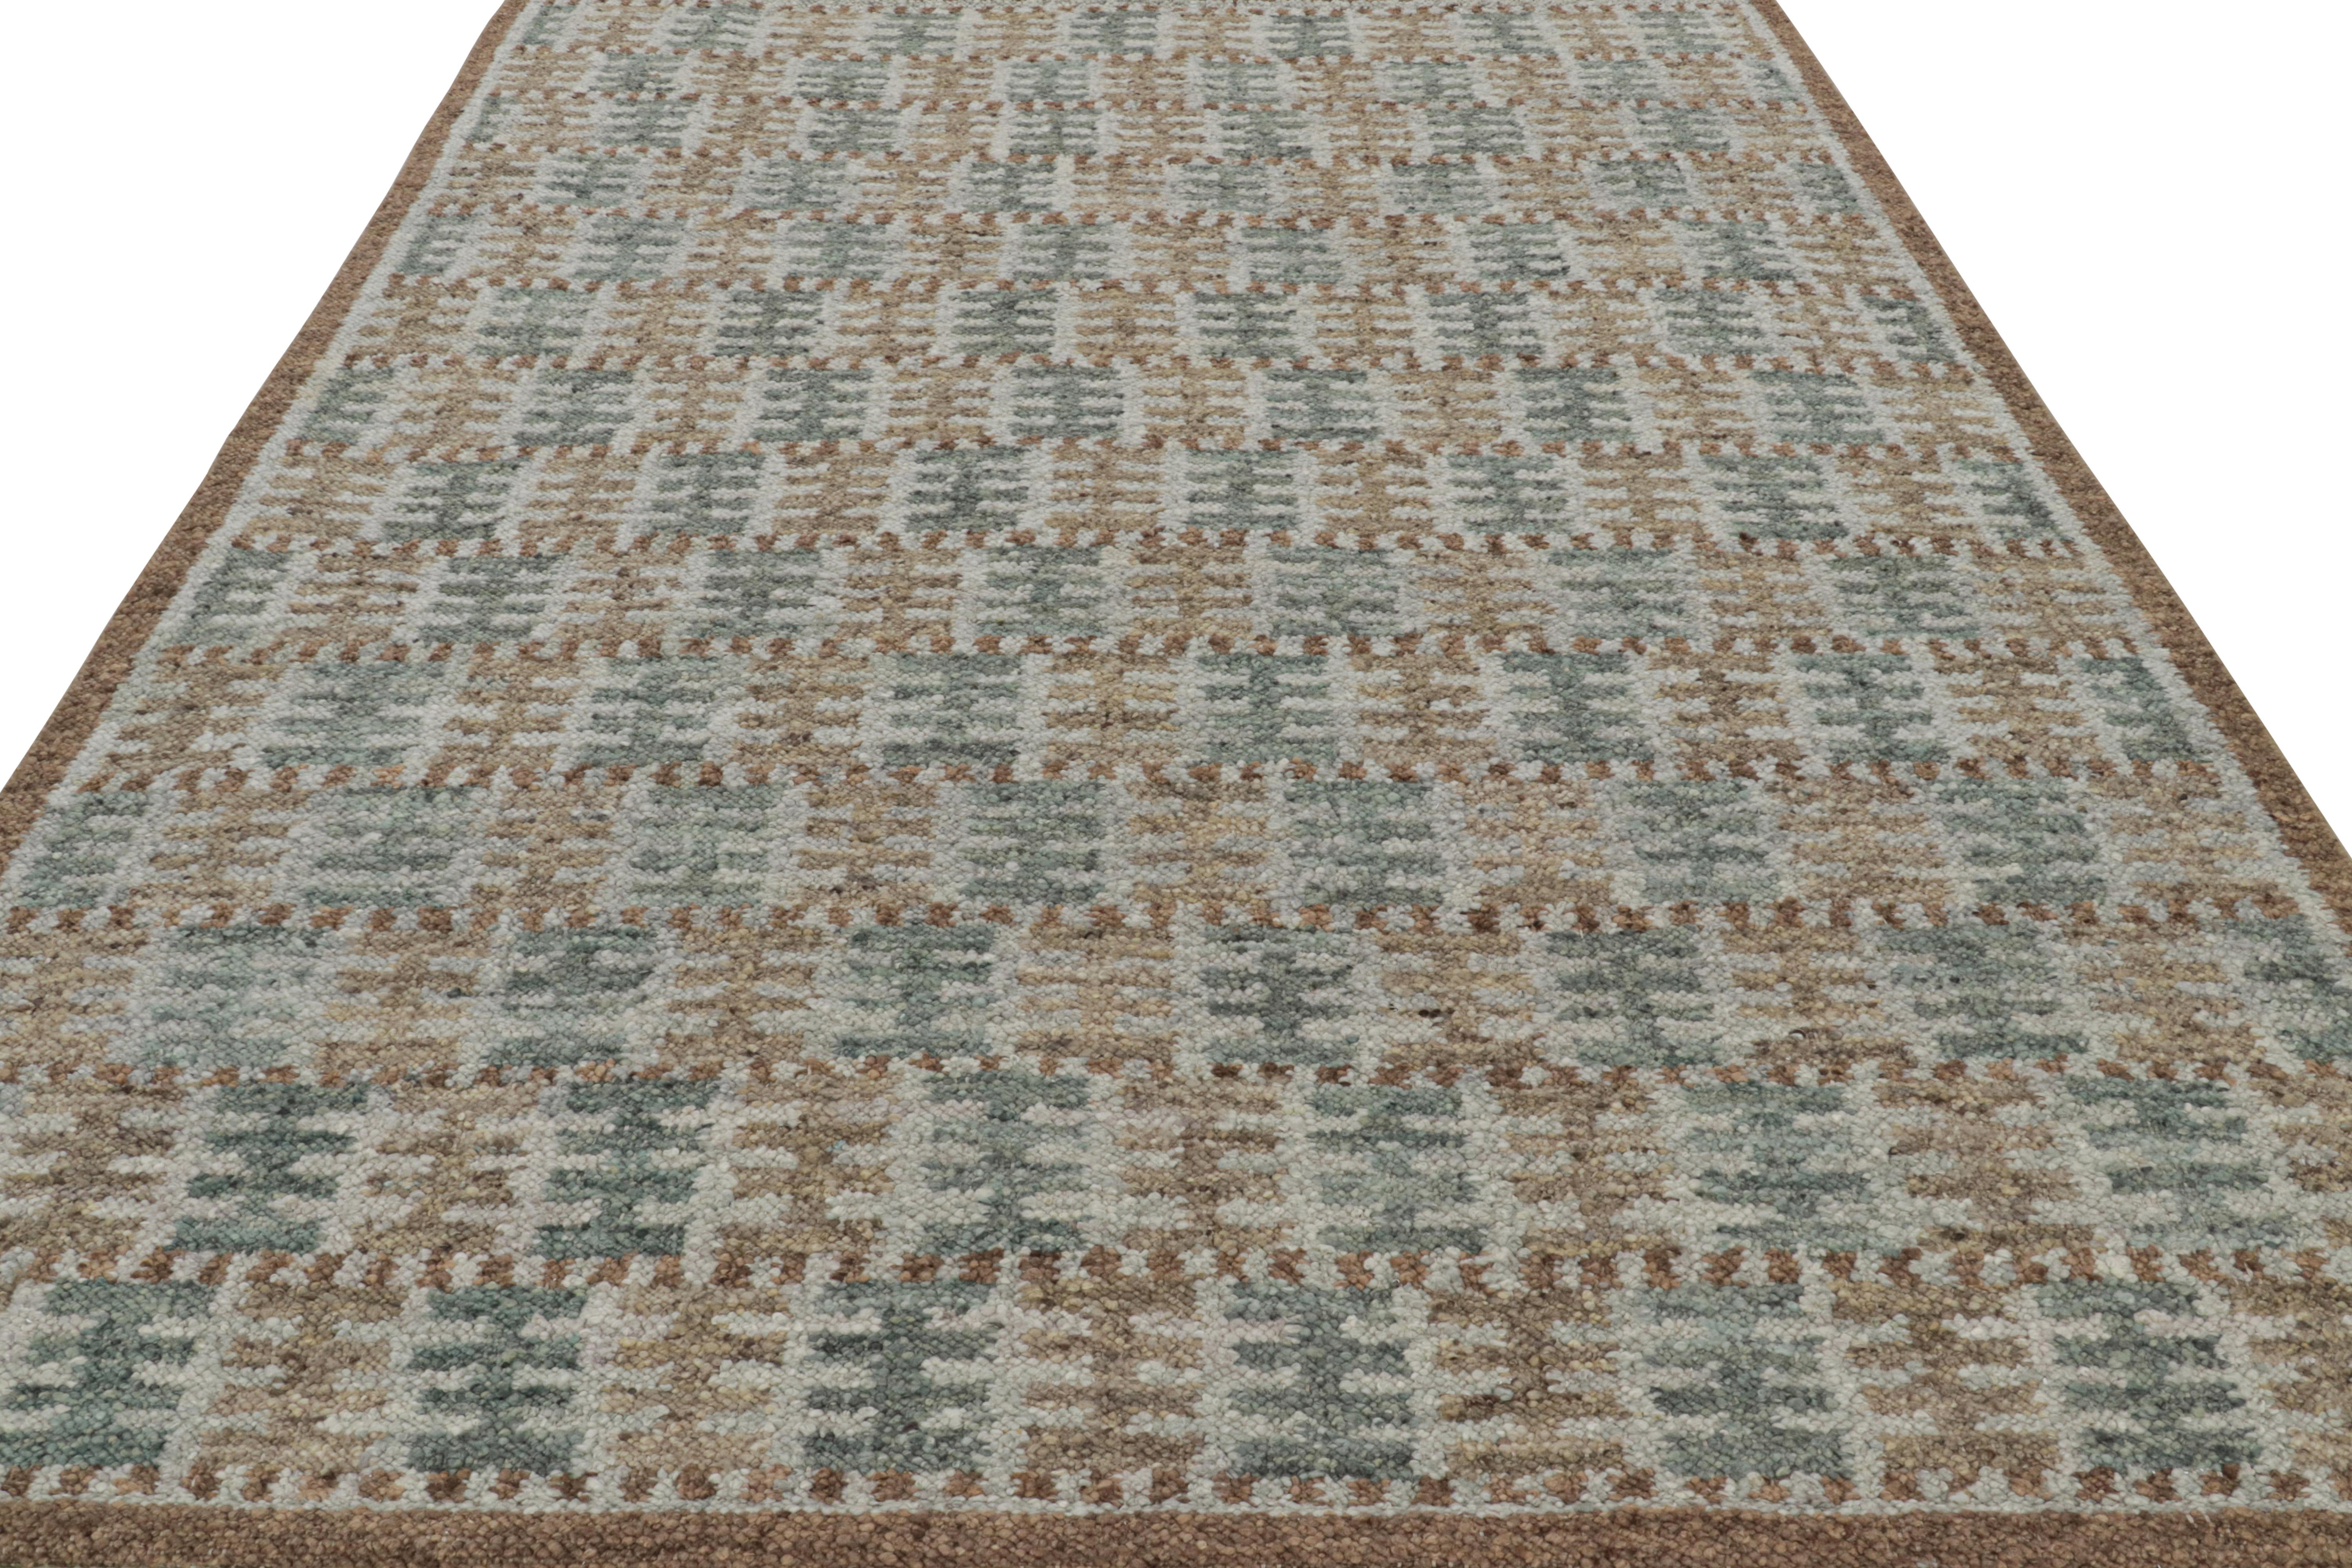 Hand-Knotted Rug & Kilim’s Scandinavian Style Rug in Beige-Brown and Teal Geometric Patterns For Sale